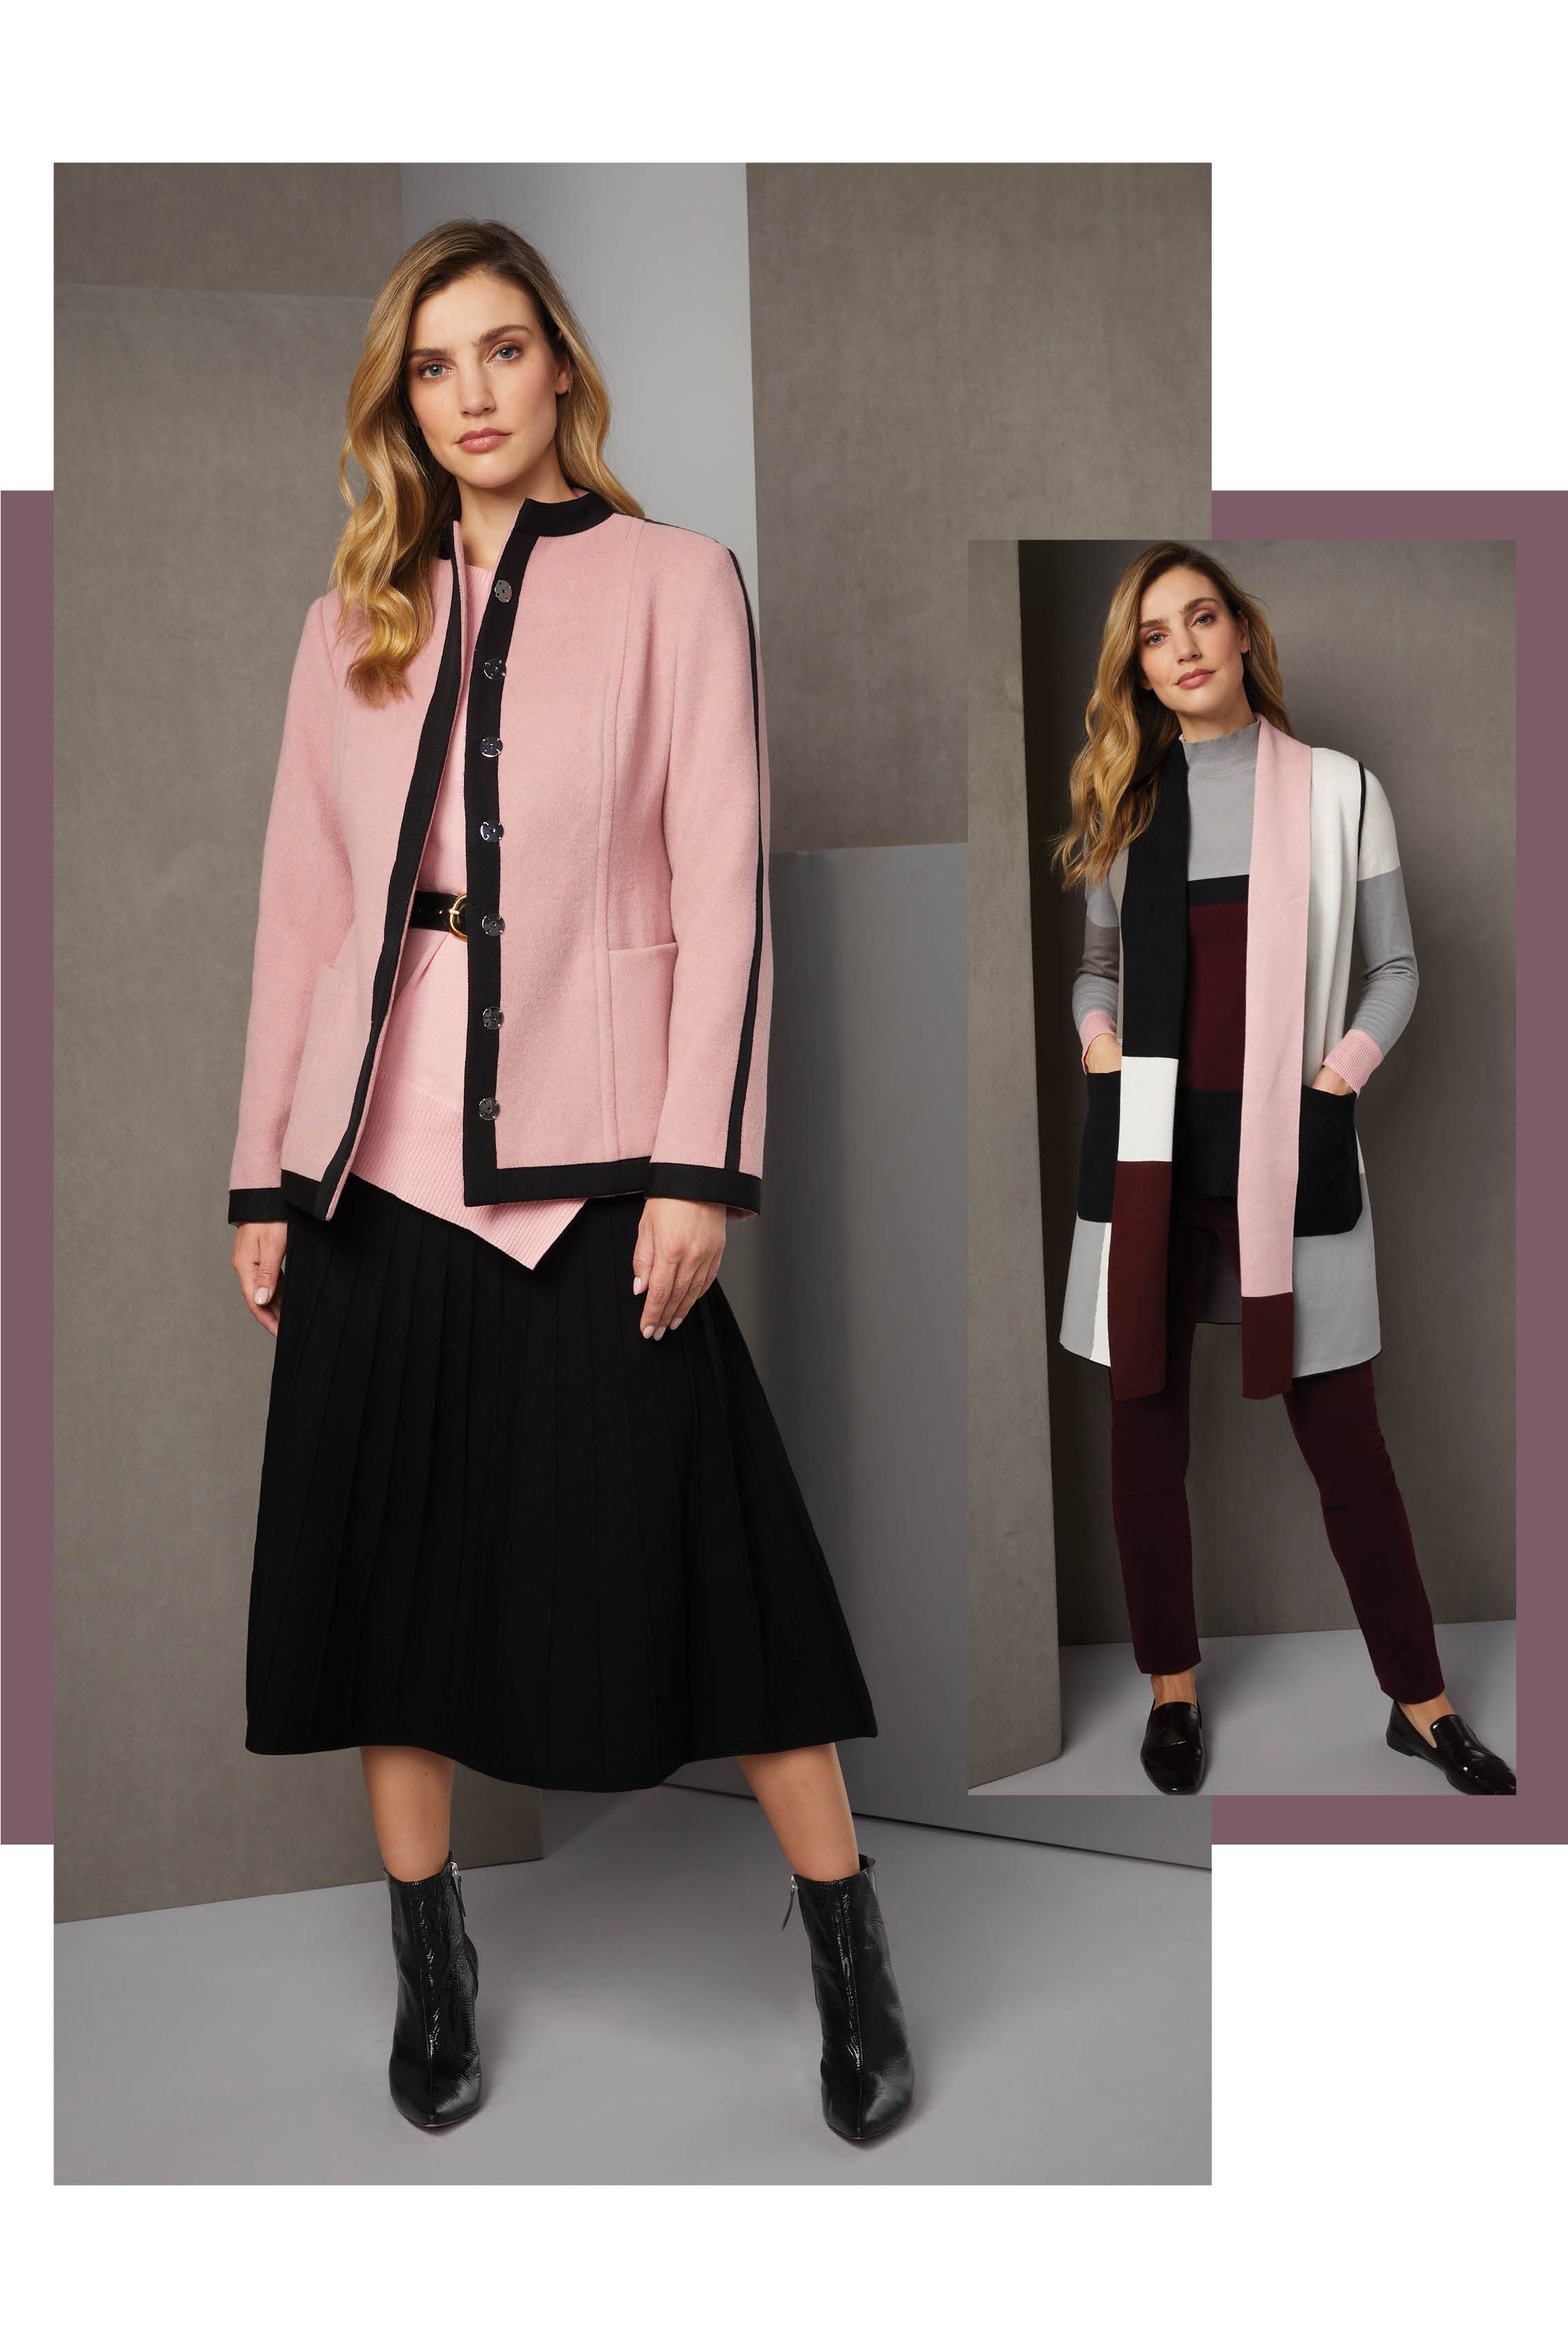 Pink and black are fabulously retro. The pink wool-blend jacket has black ribbon trim that resonates with the black Italian leather belt and the expanding pleats of the knit skirt. 